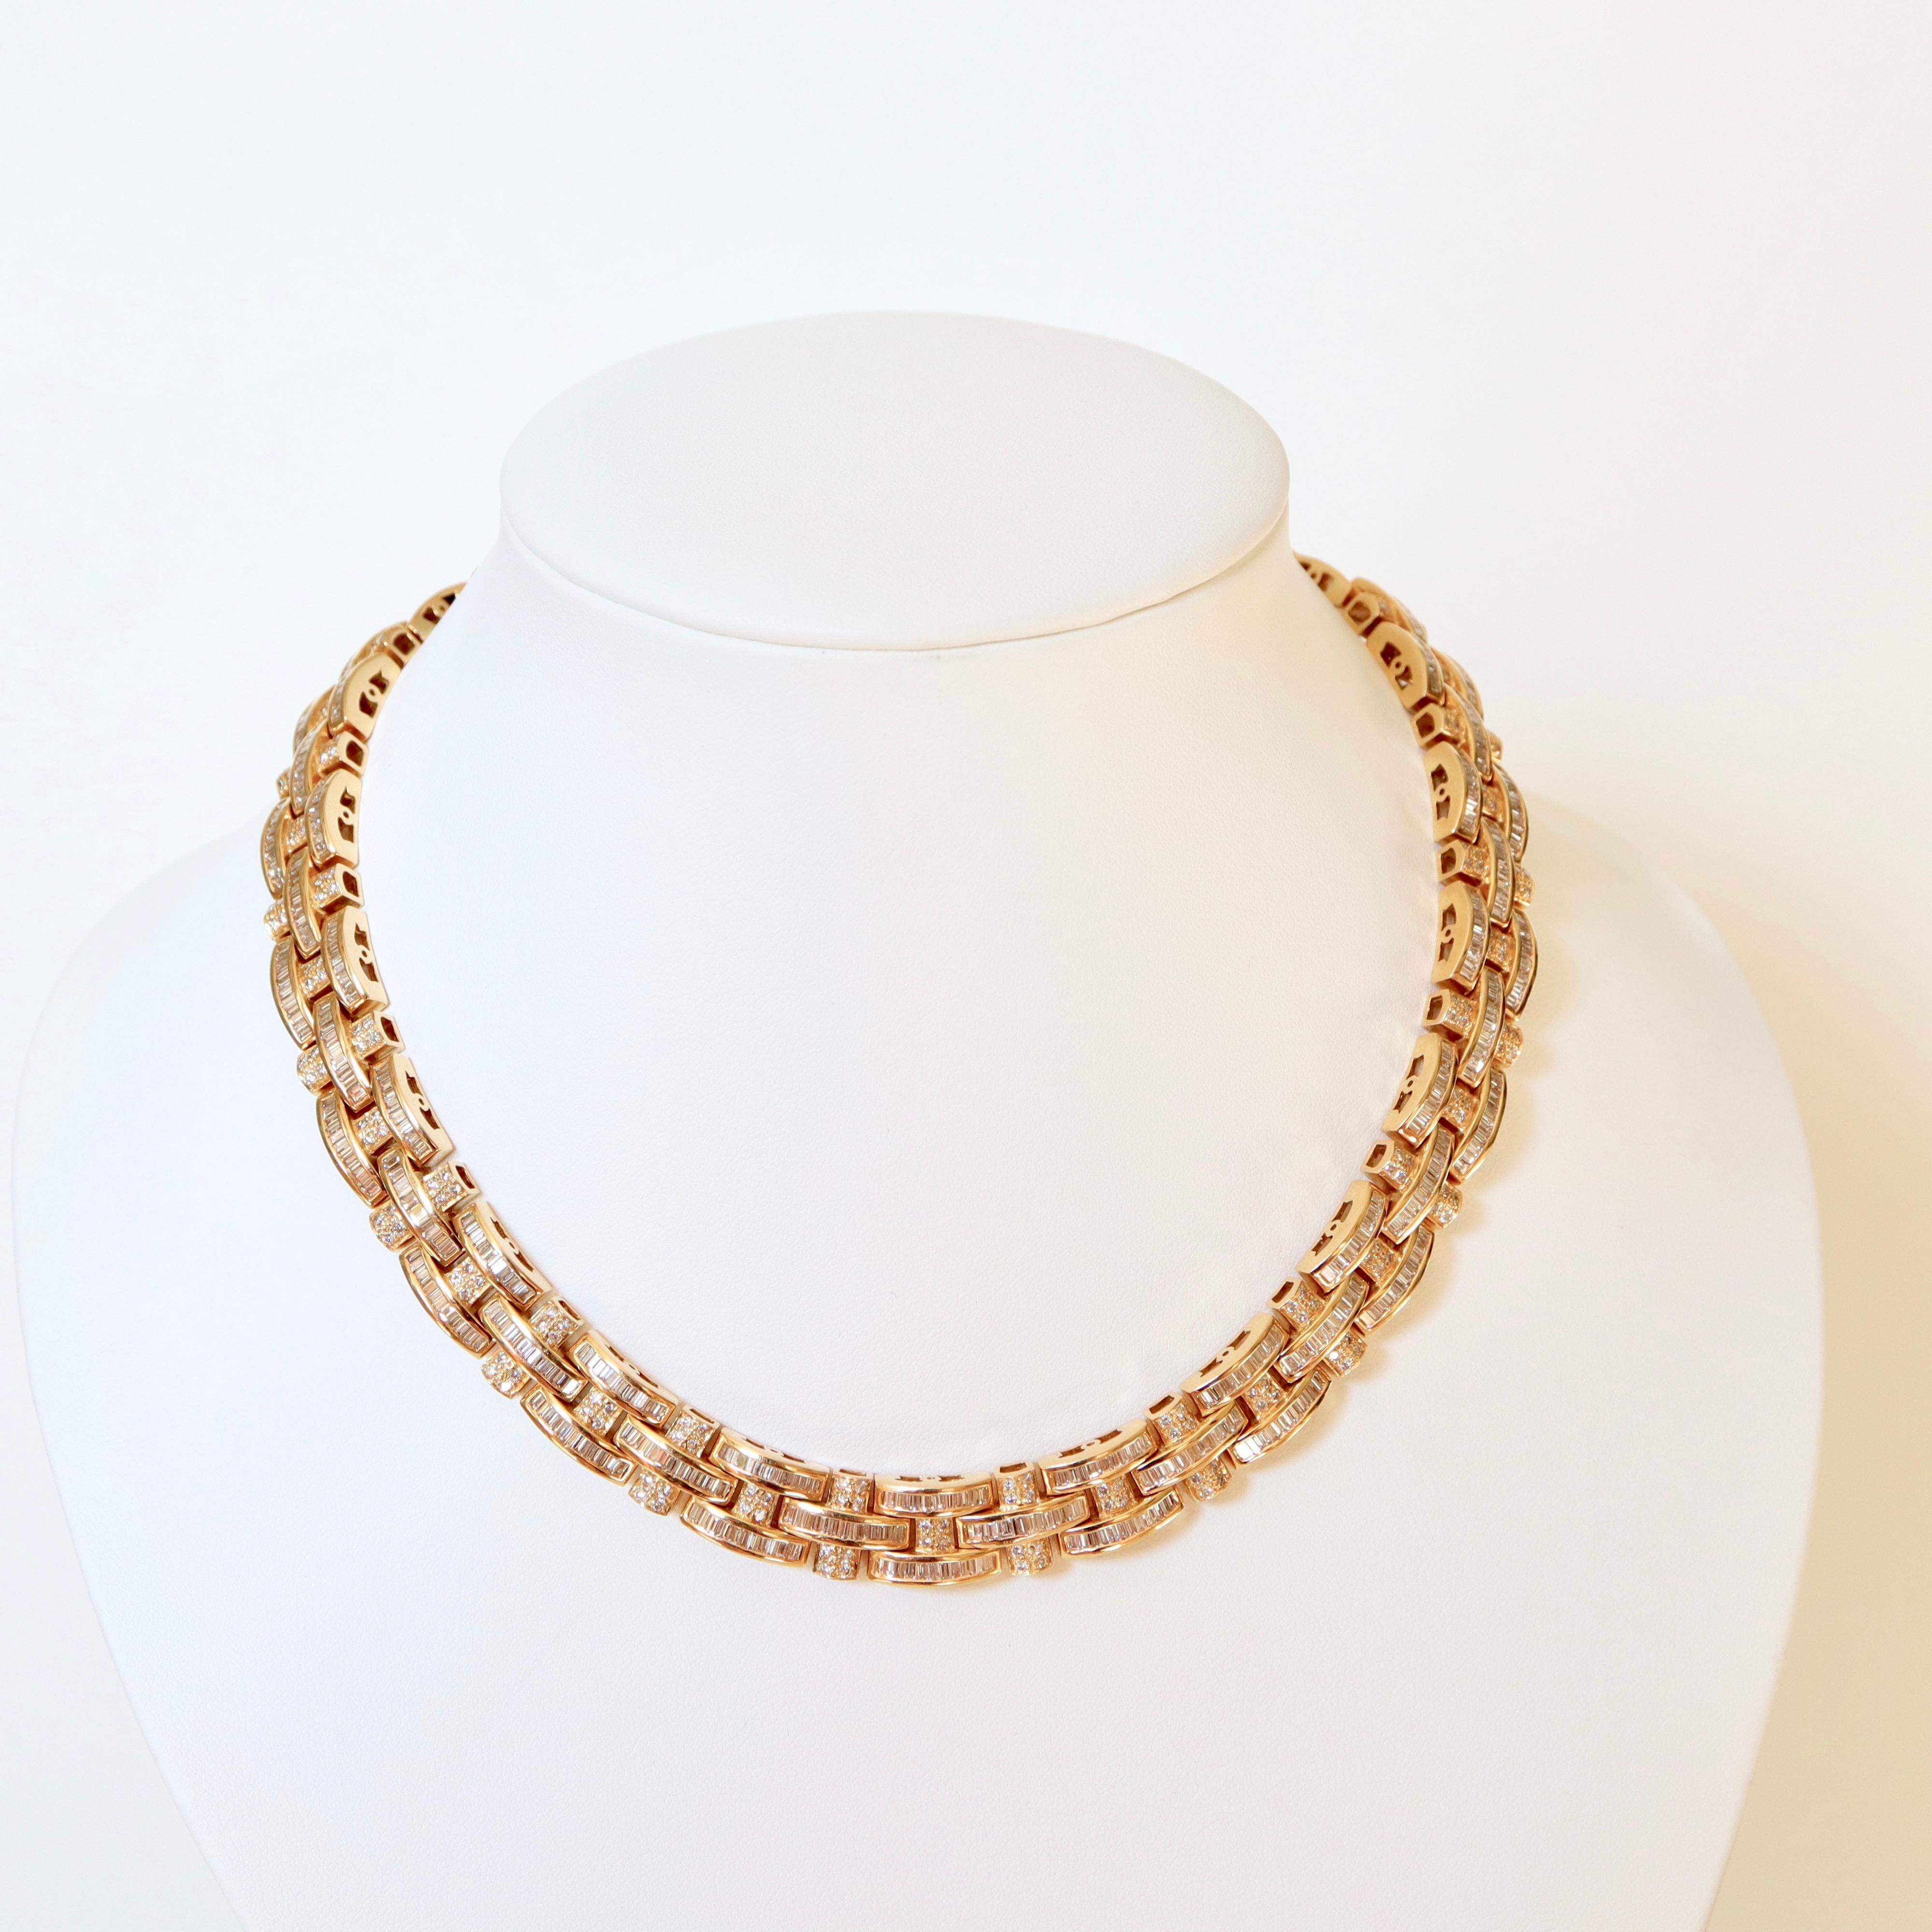 Diamond  18-karat yellow gold necklace
Diamond-paved 18-carat yellow gold necklace.
The links (31 links) are entirely paved with diamonds except on the rear part of the necklace (15 links).
Alternating stylized H-shaped links and Plus-shaped links